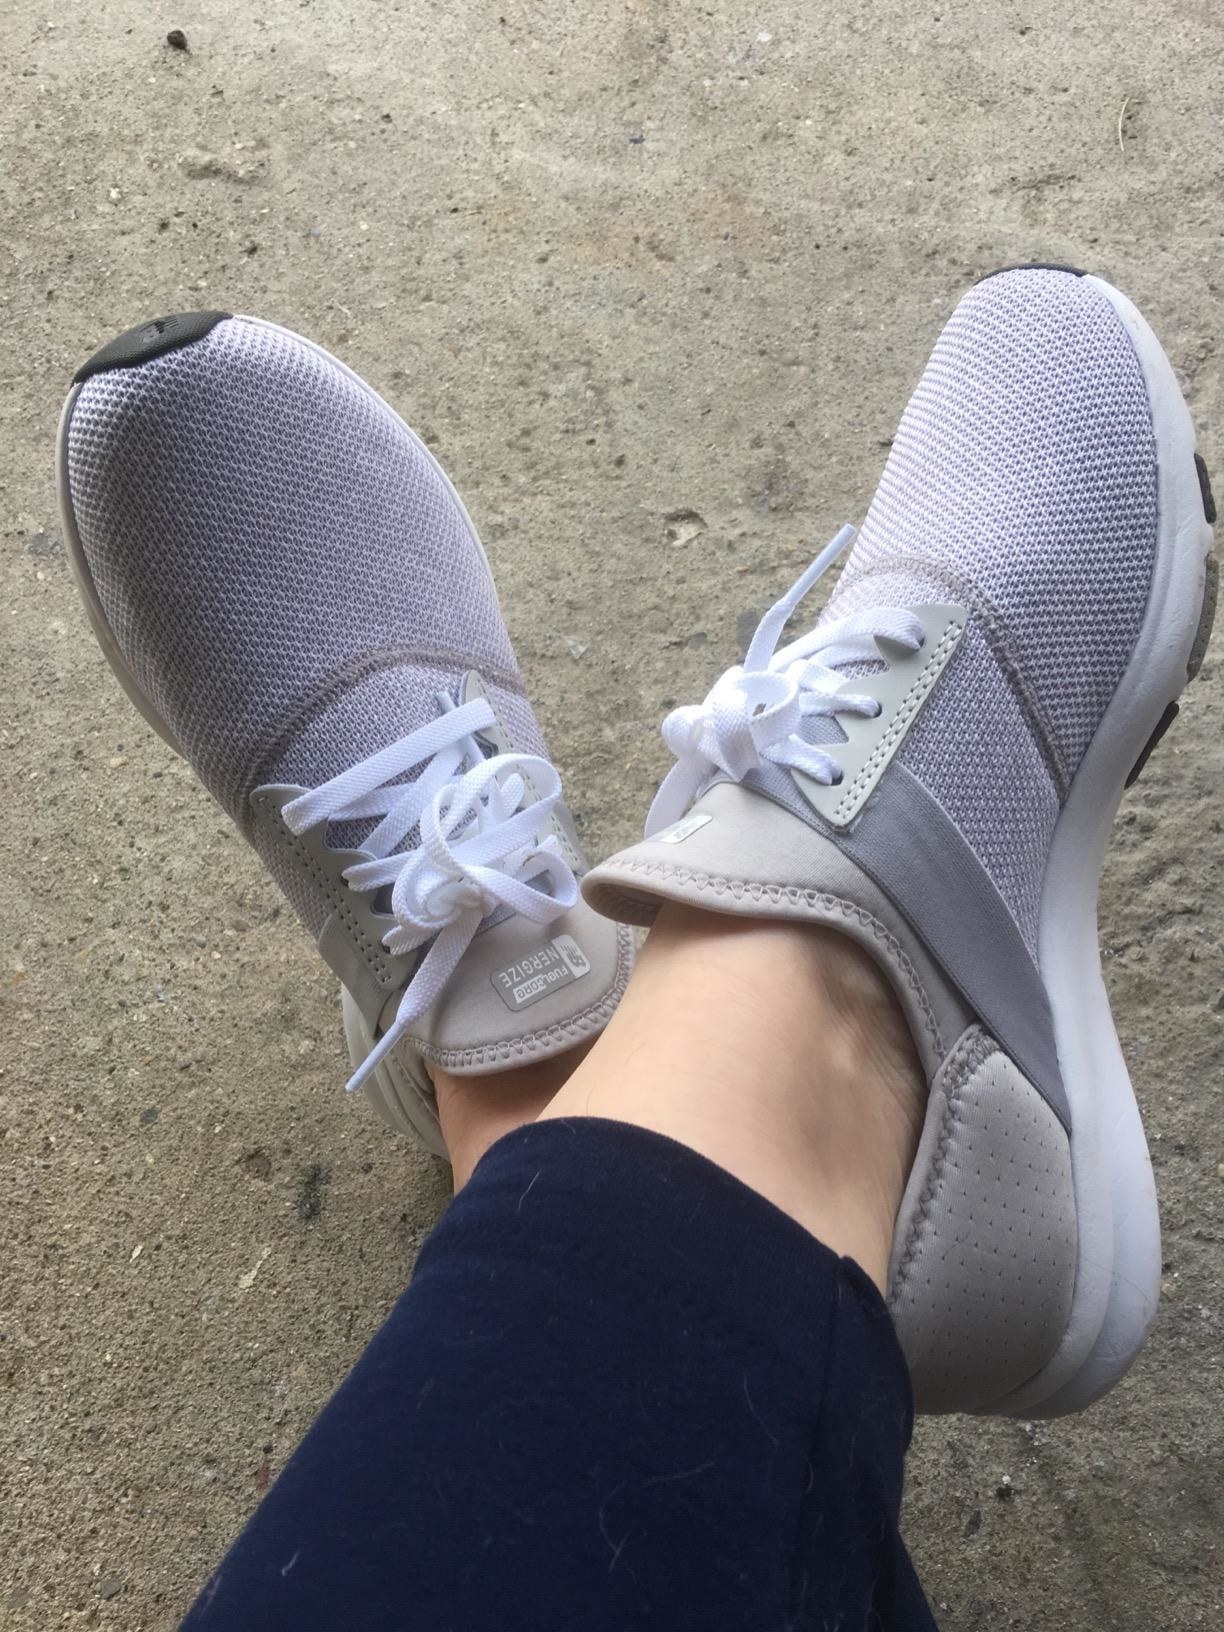 19 Best Shoes For Nurses That Are Super Comfortable